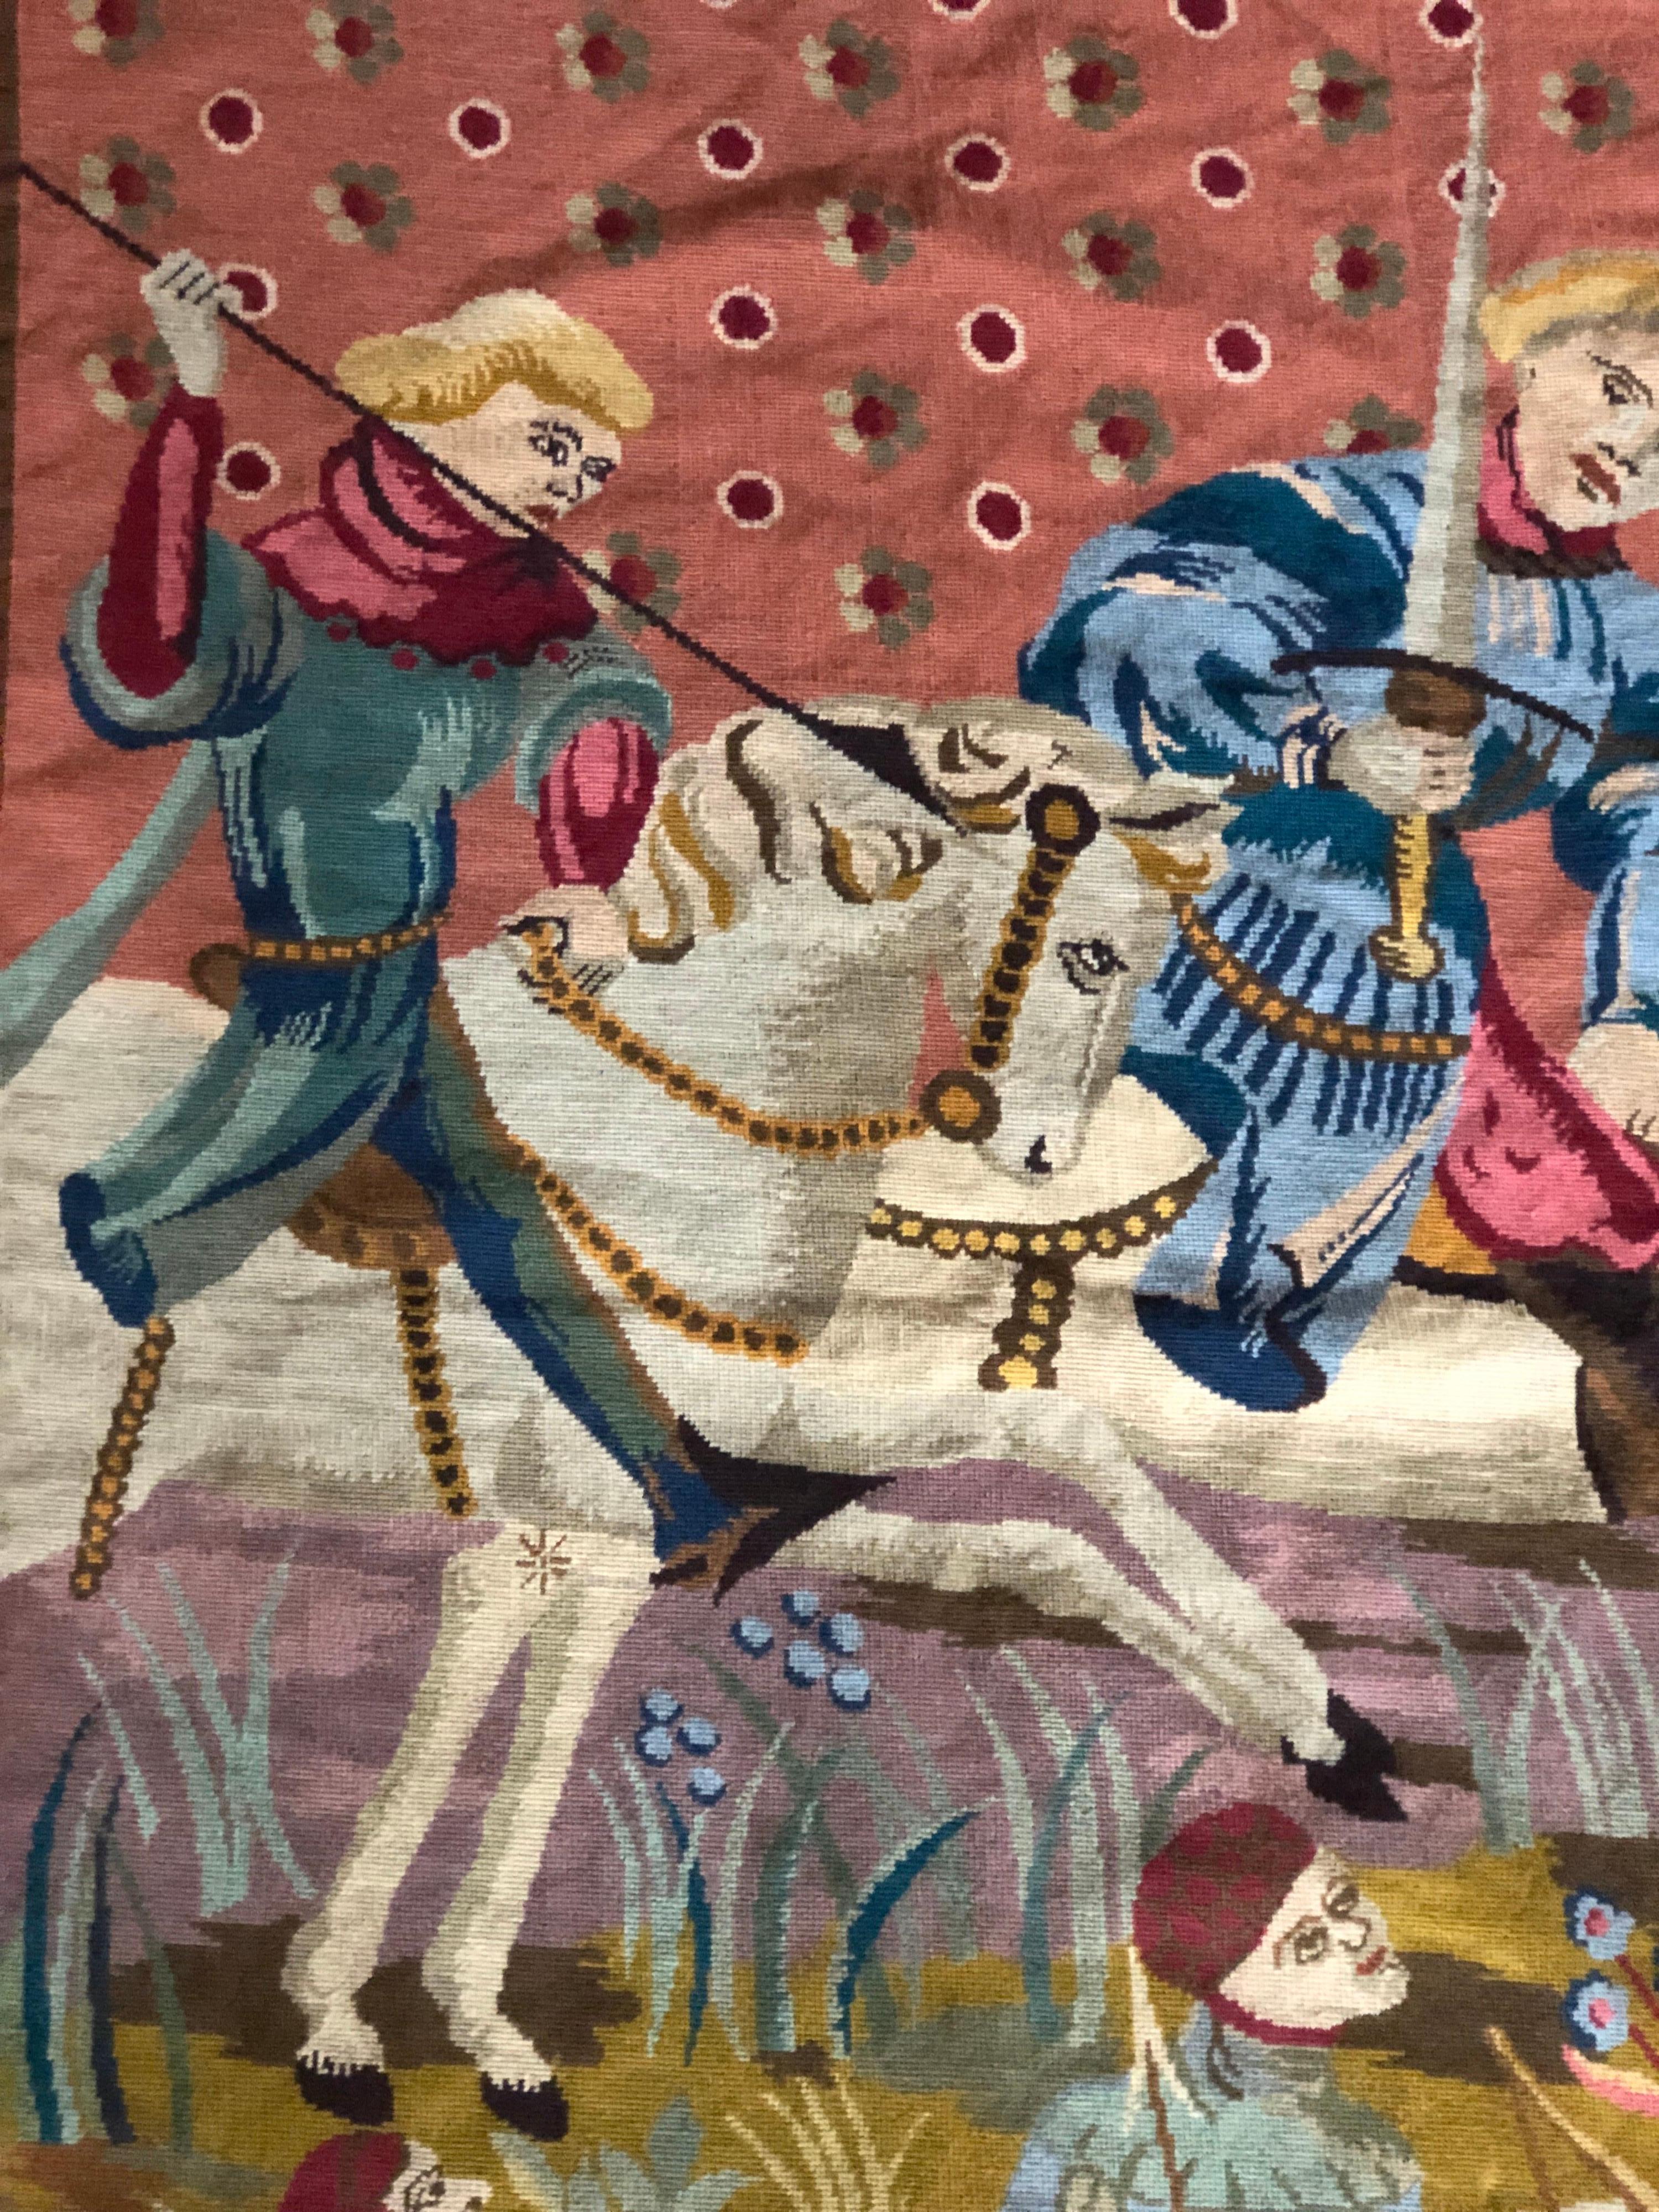 Large tapestry with hunting scene made of wool in neutral colors.
France, circa 1950.